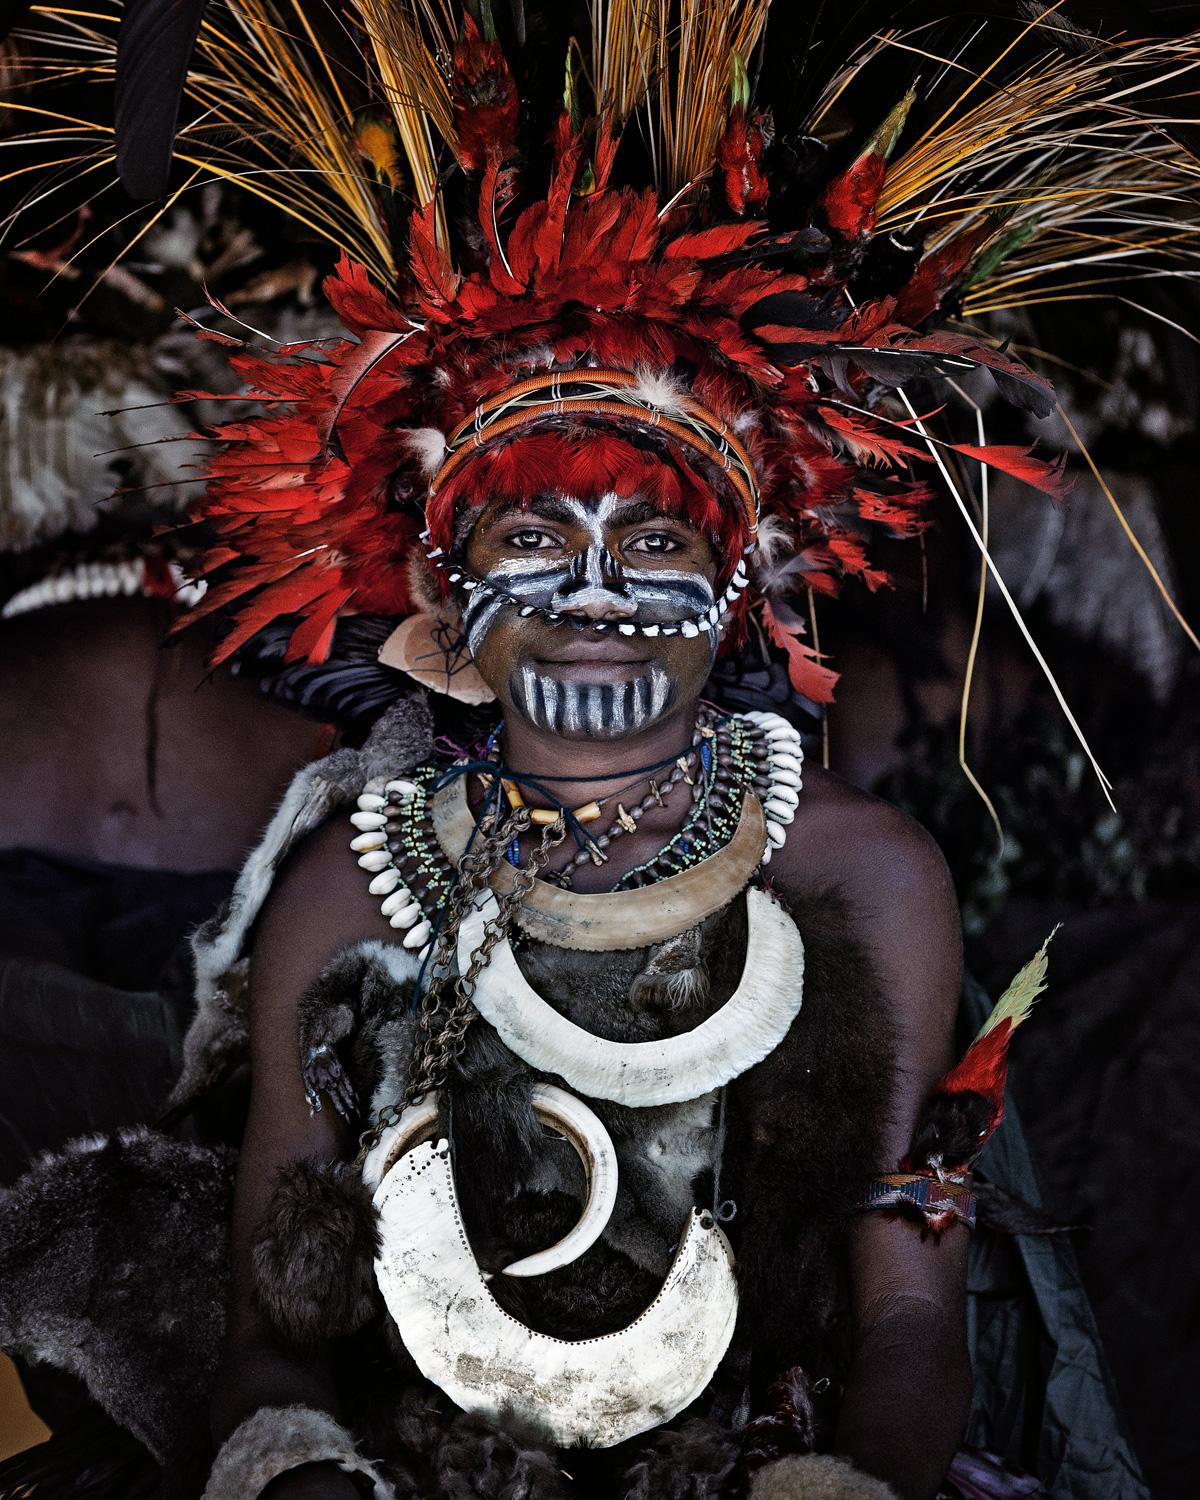 "XV 80G - Goroka, Eastern Highlands - Papua New Guinea, 2010

The indigenous population of the world’s second largest island is one of the most heterogeneous in the world. The harsh terrain and historic inter-tribal warfare has led to village